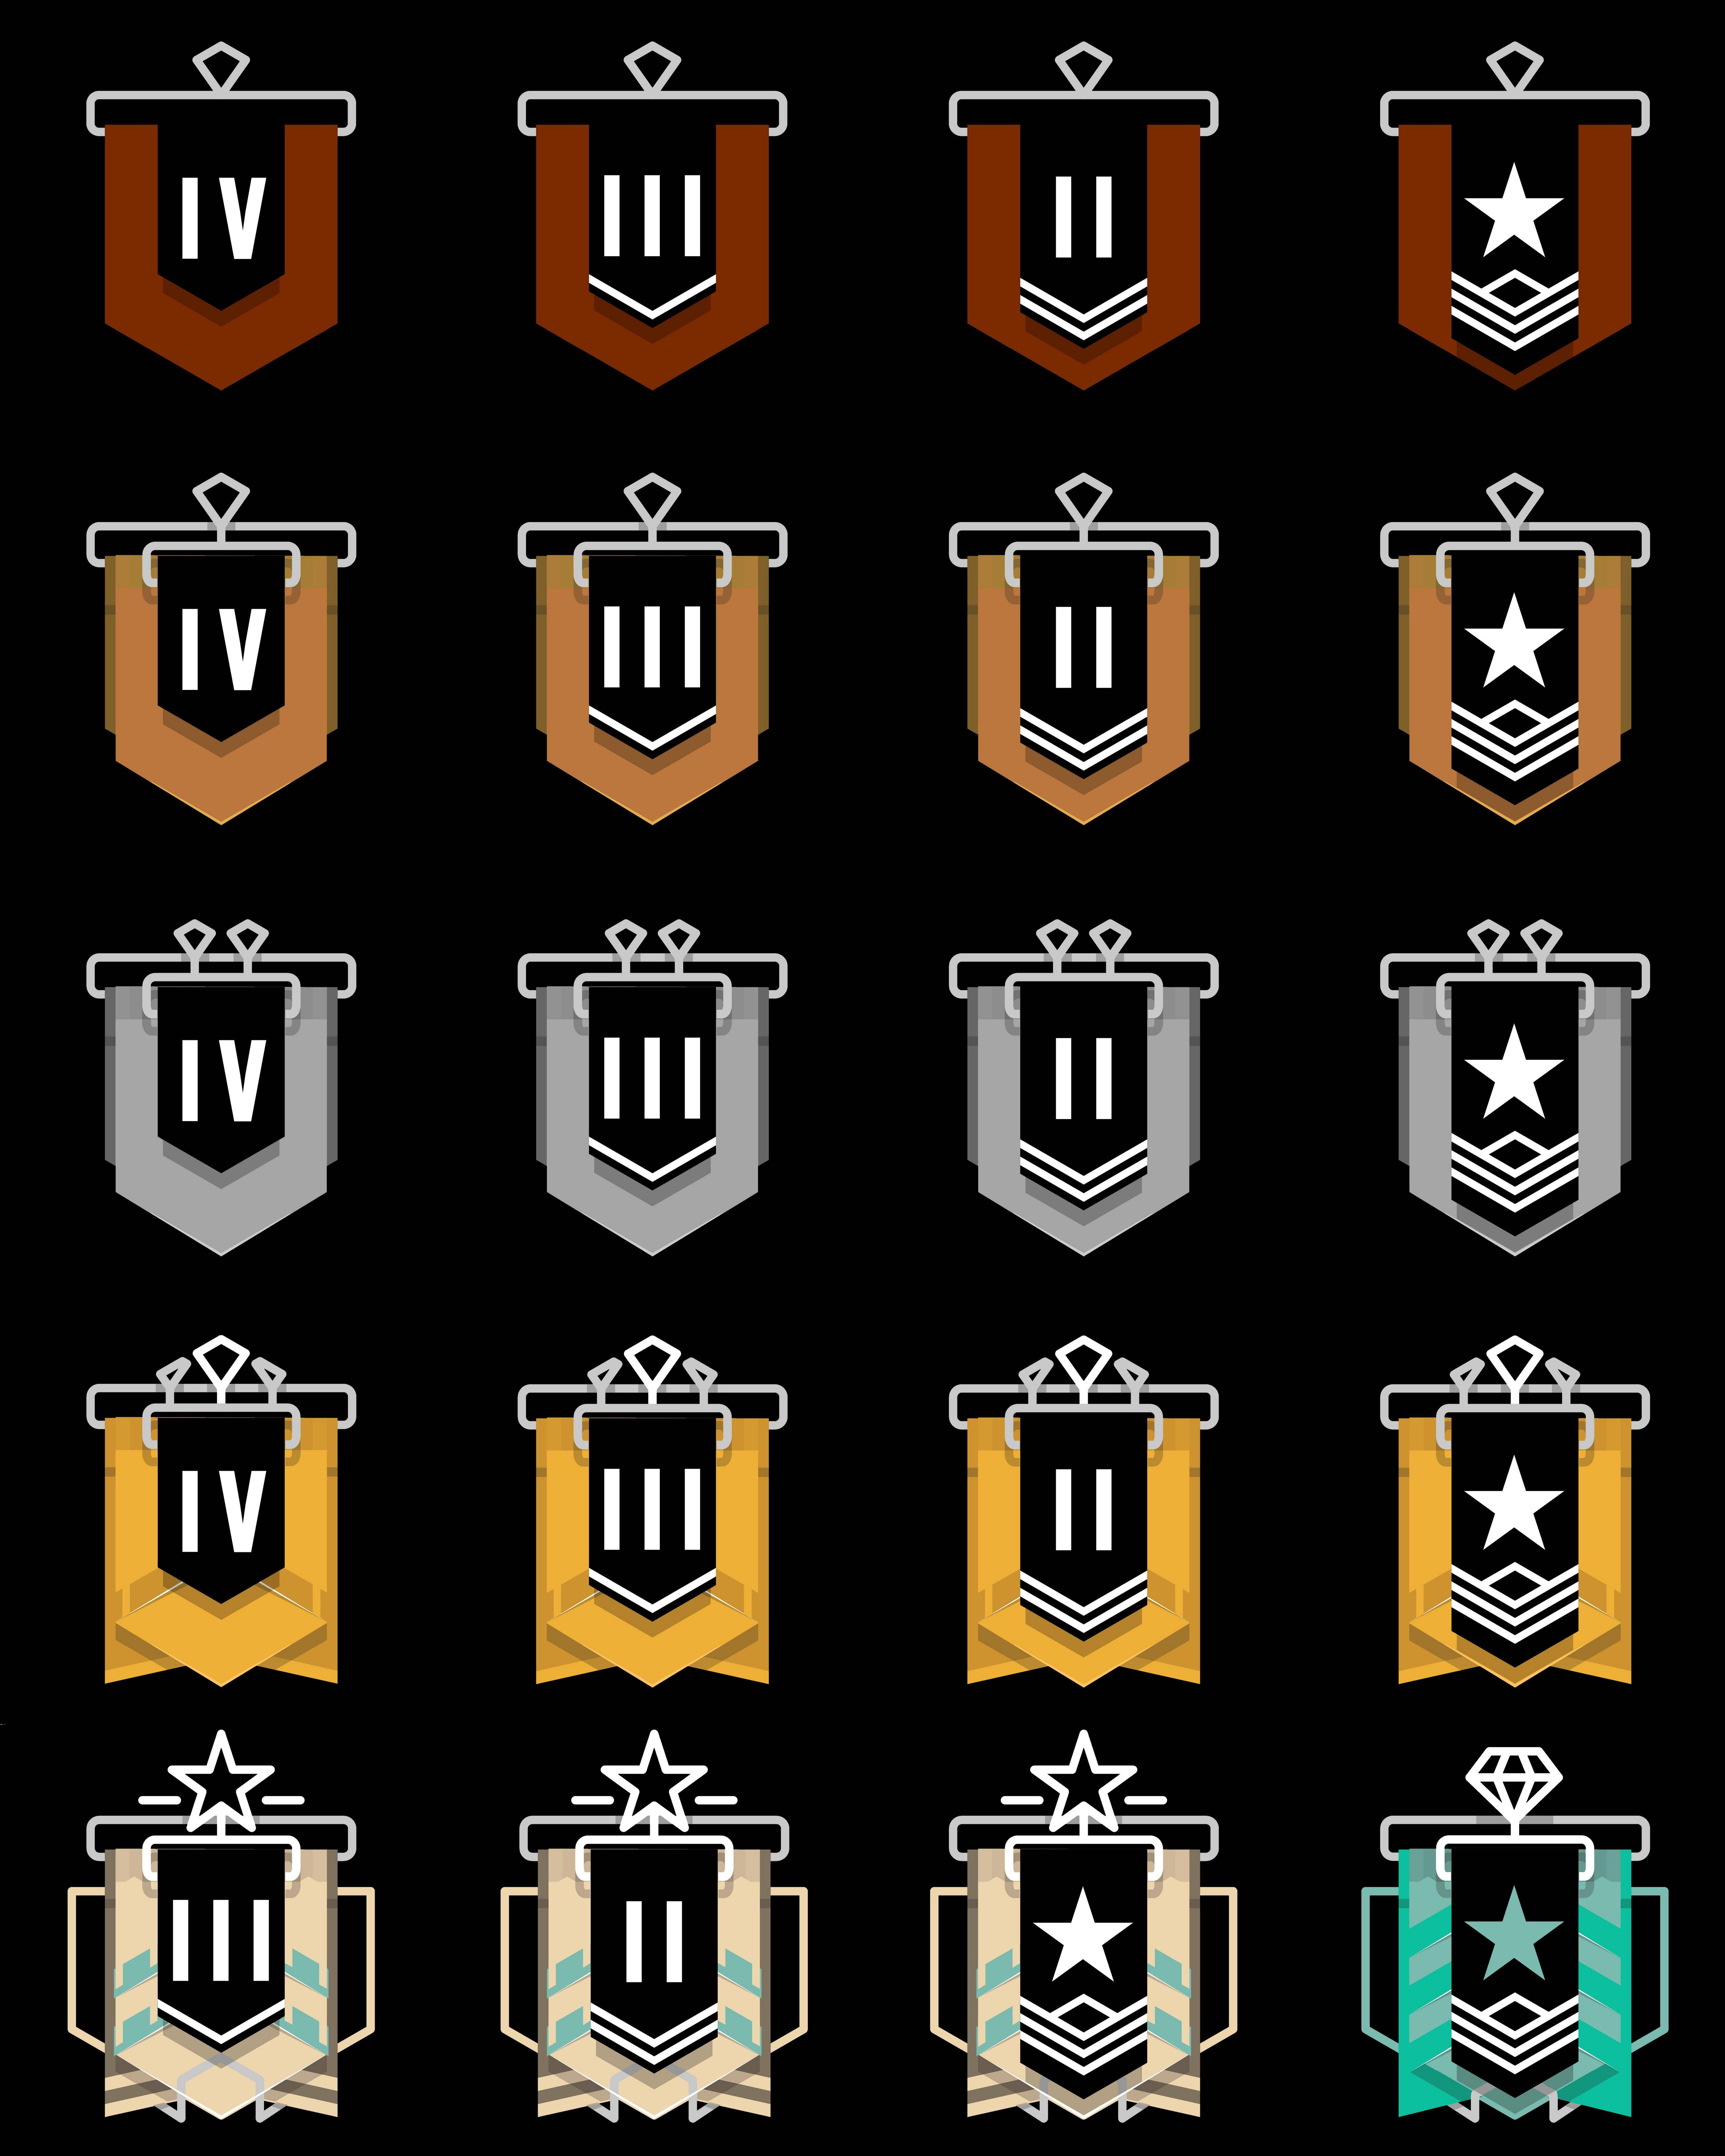 Rainbow Six: Siege - Icon by Blagoicons 